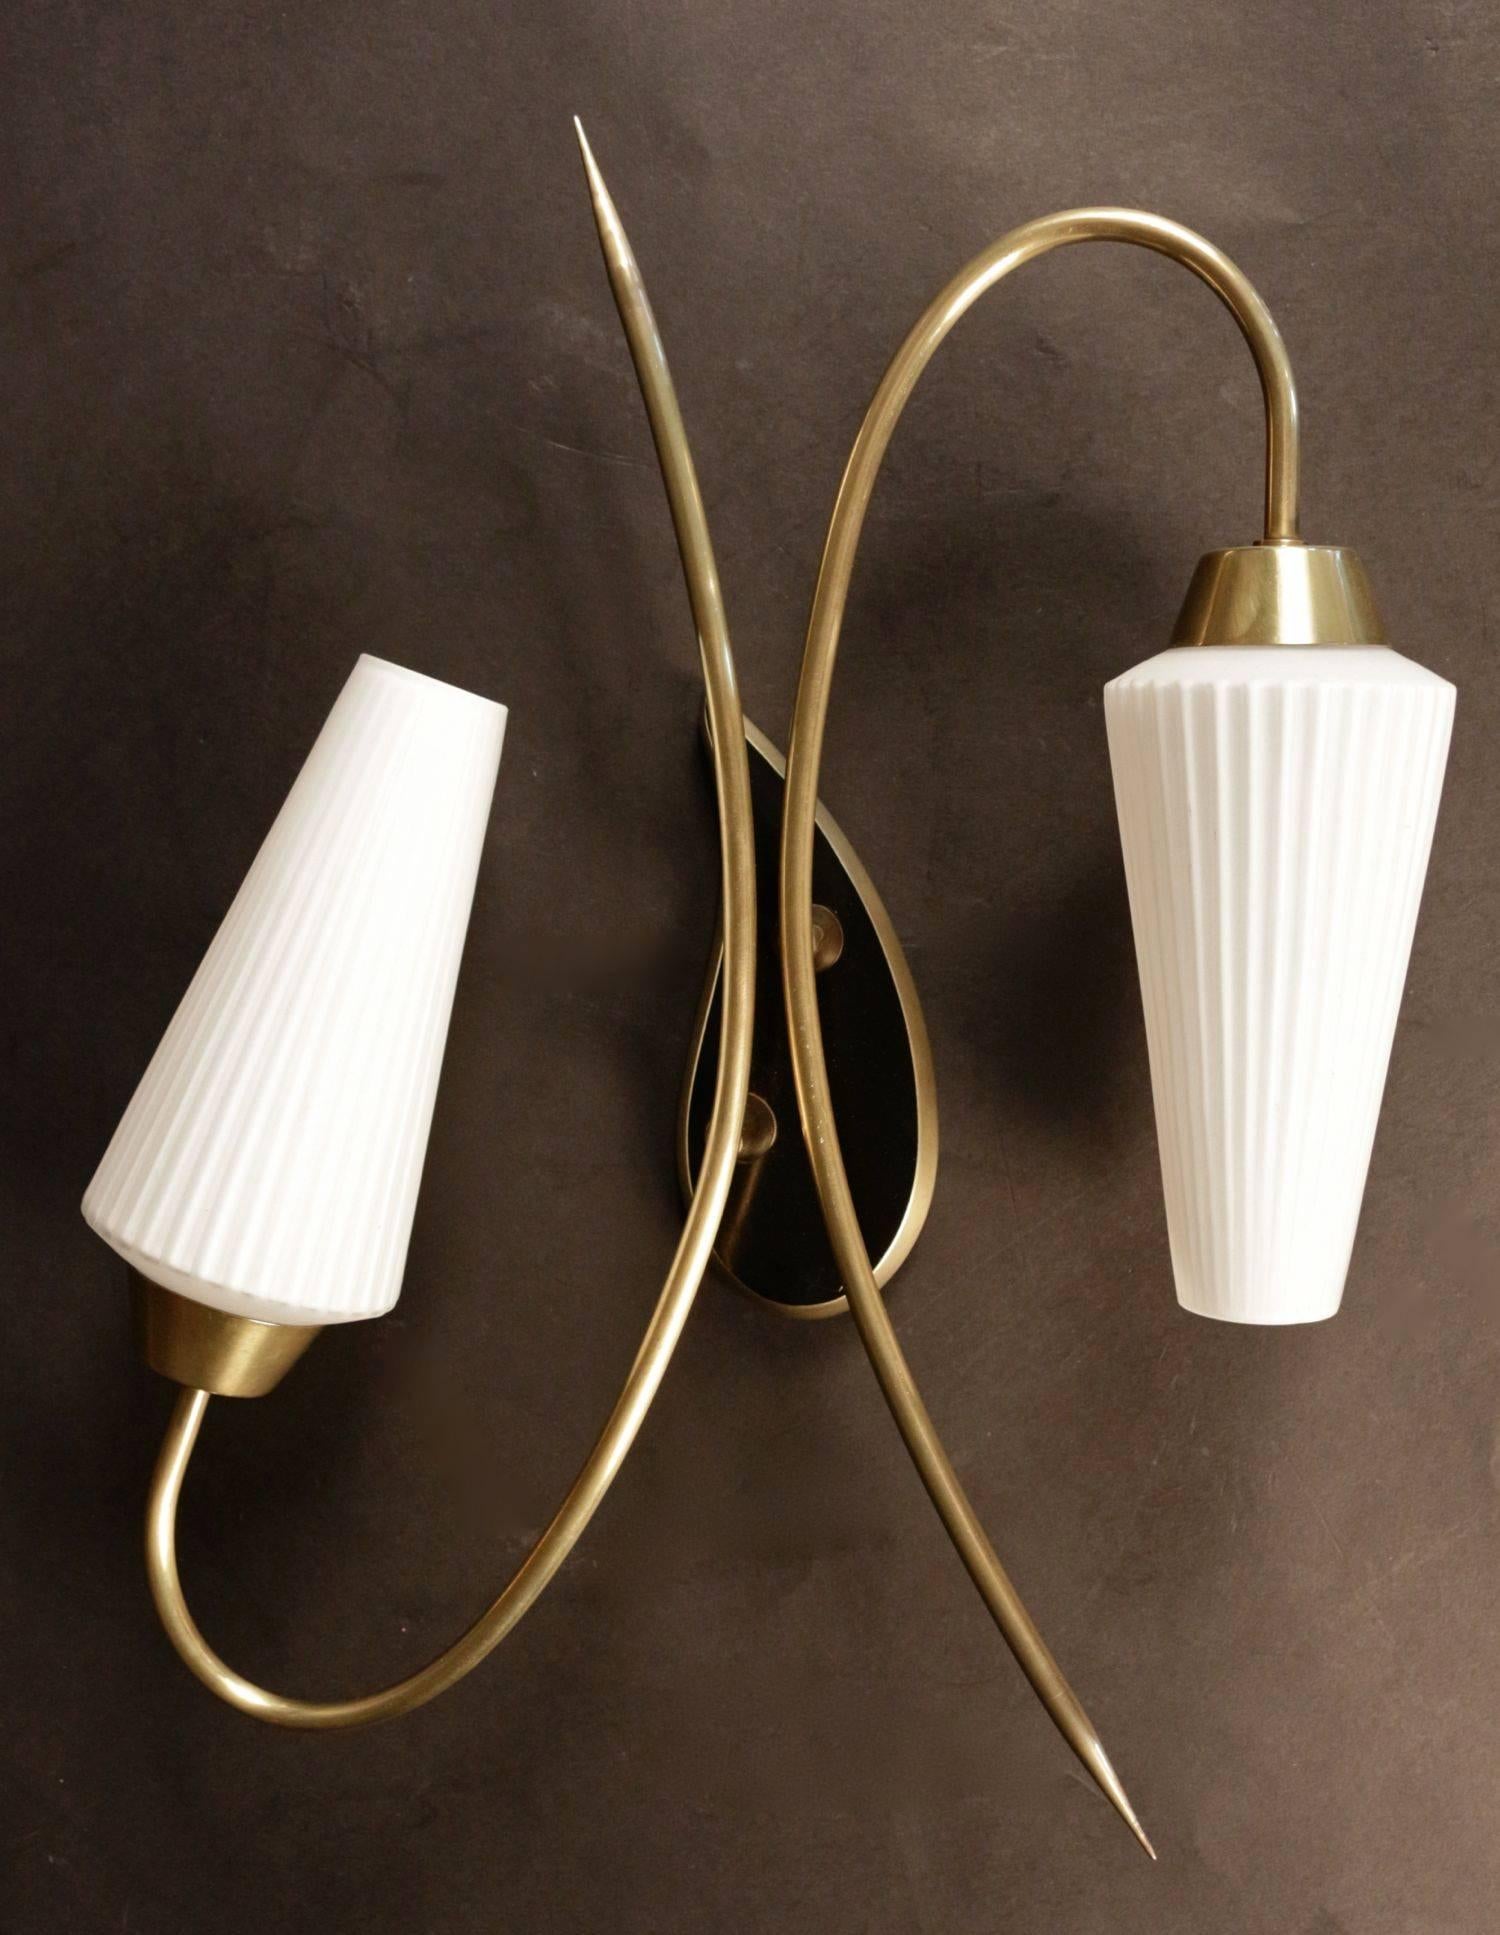 Two 1950s brass sconces with white opaline glass. One is composed of three brass arms ending with three folded opaline glass lampshades and the other is composed of two brass arms ending with two folded opaline glass lampshades. For both sconces the